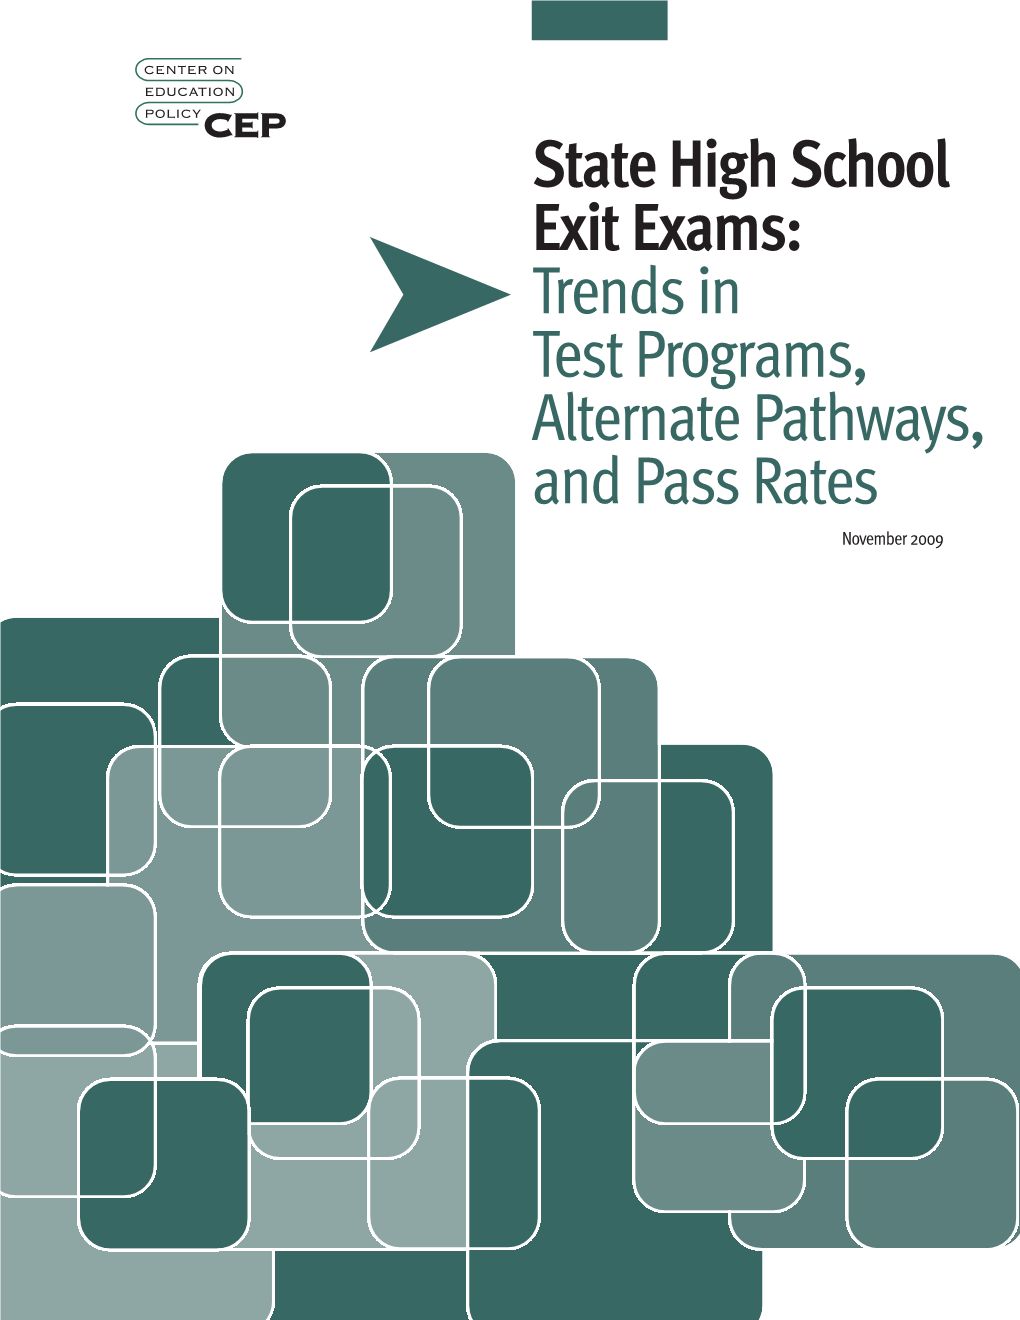 Trends in Test Programs, Alternate Pathways, and Pass Rates November 2009 Credits and Acknowledgments